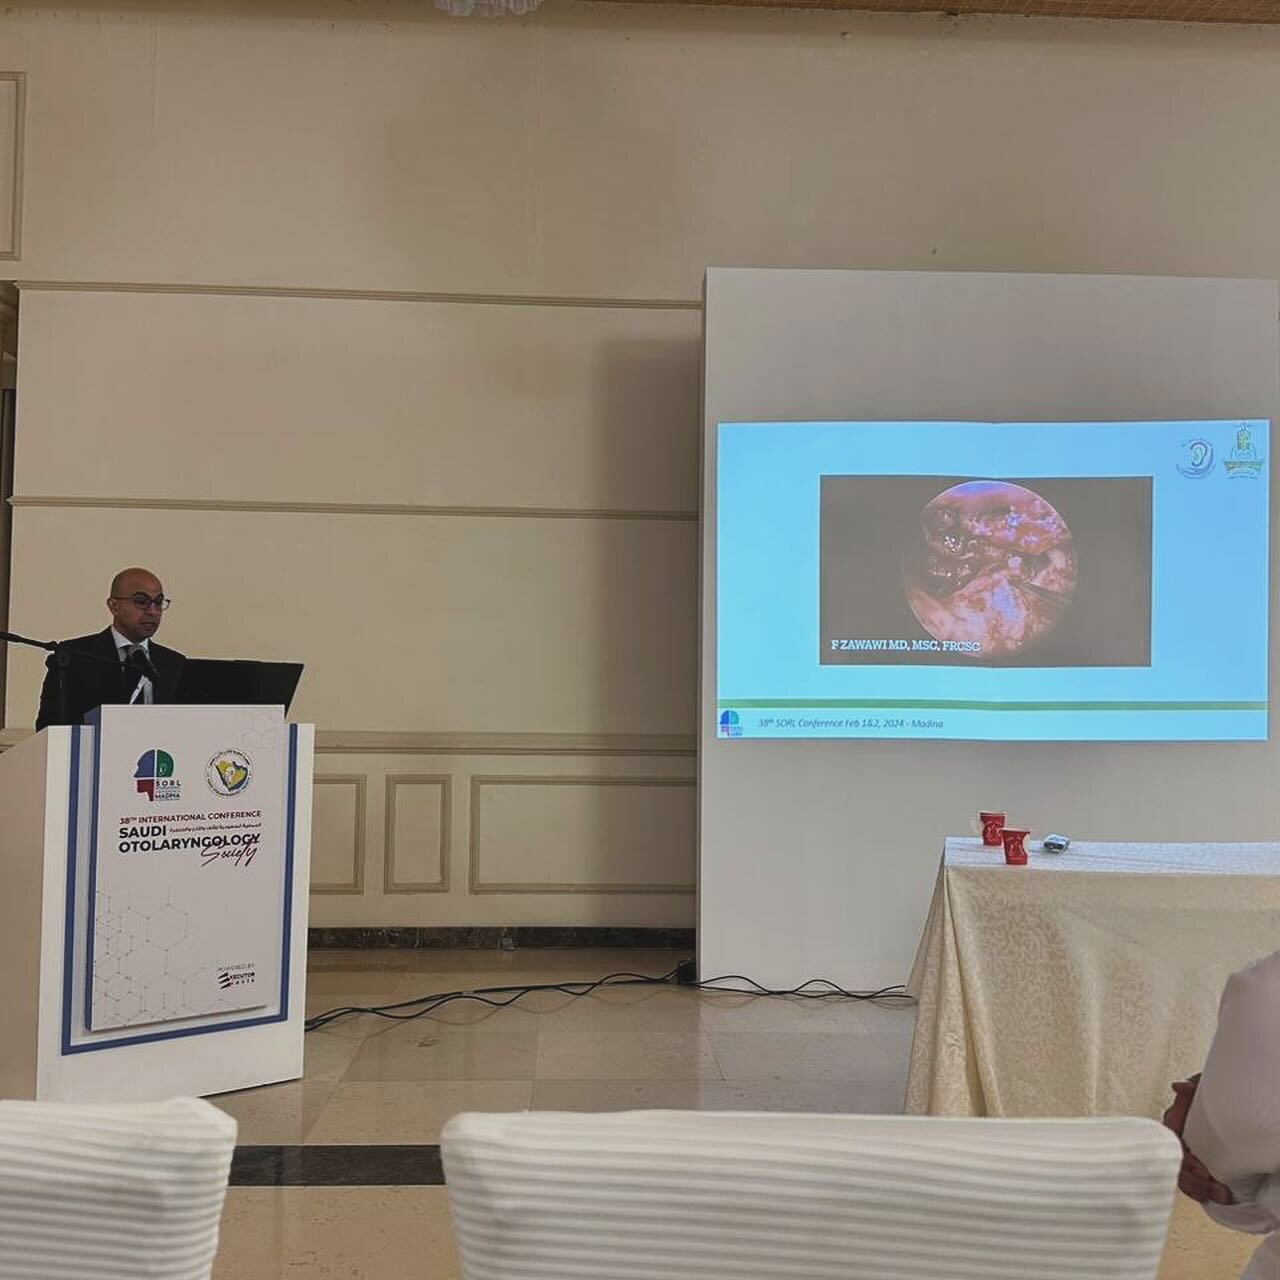 It was a great pleasure to organize the scientific content and present on pediatric otolaryngology in SORL meeting in Madina. Thank you to SORL for organizing such a wonderful meeting.
كان لي الشرف ان اكون منظم اللجنة العلمية لبرنامج الانف و الاذن و 